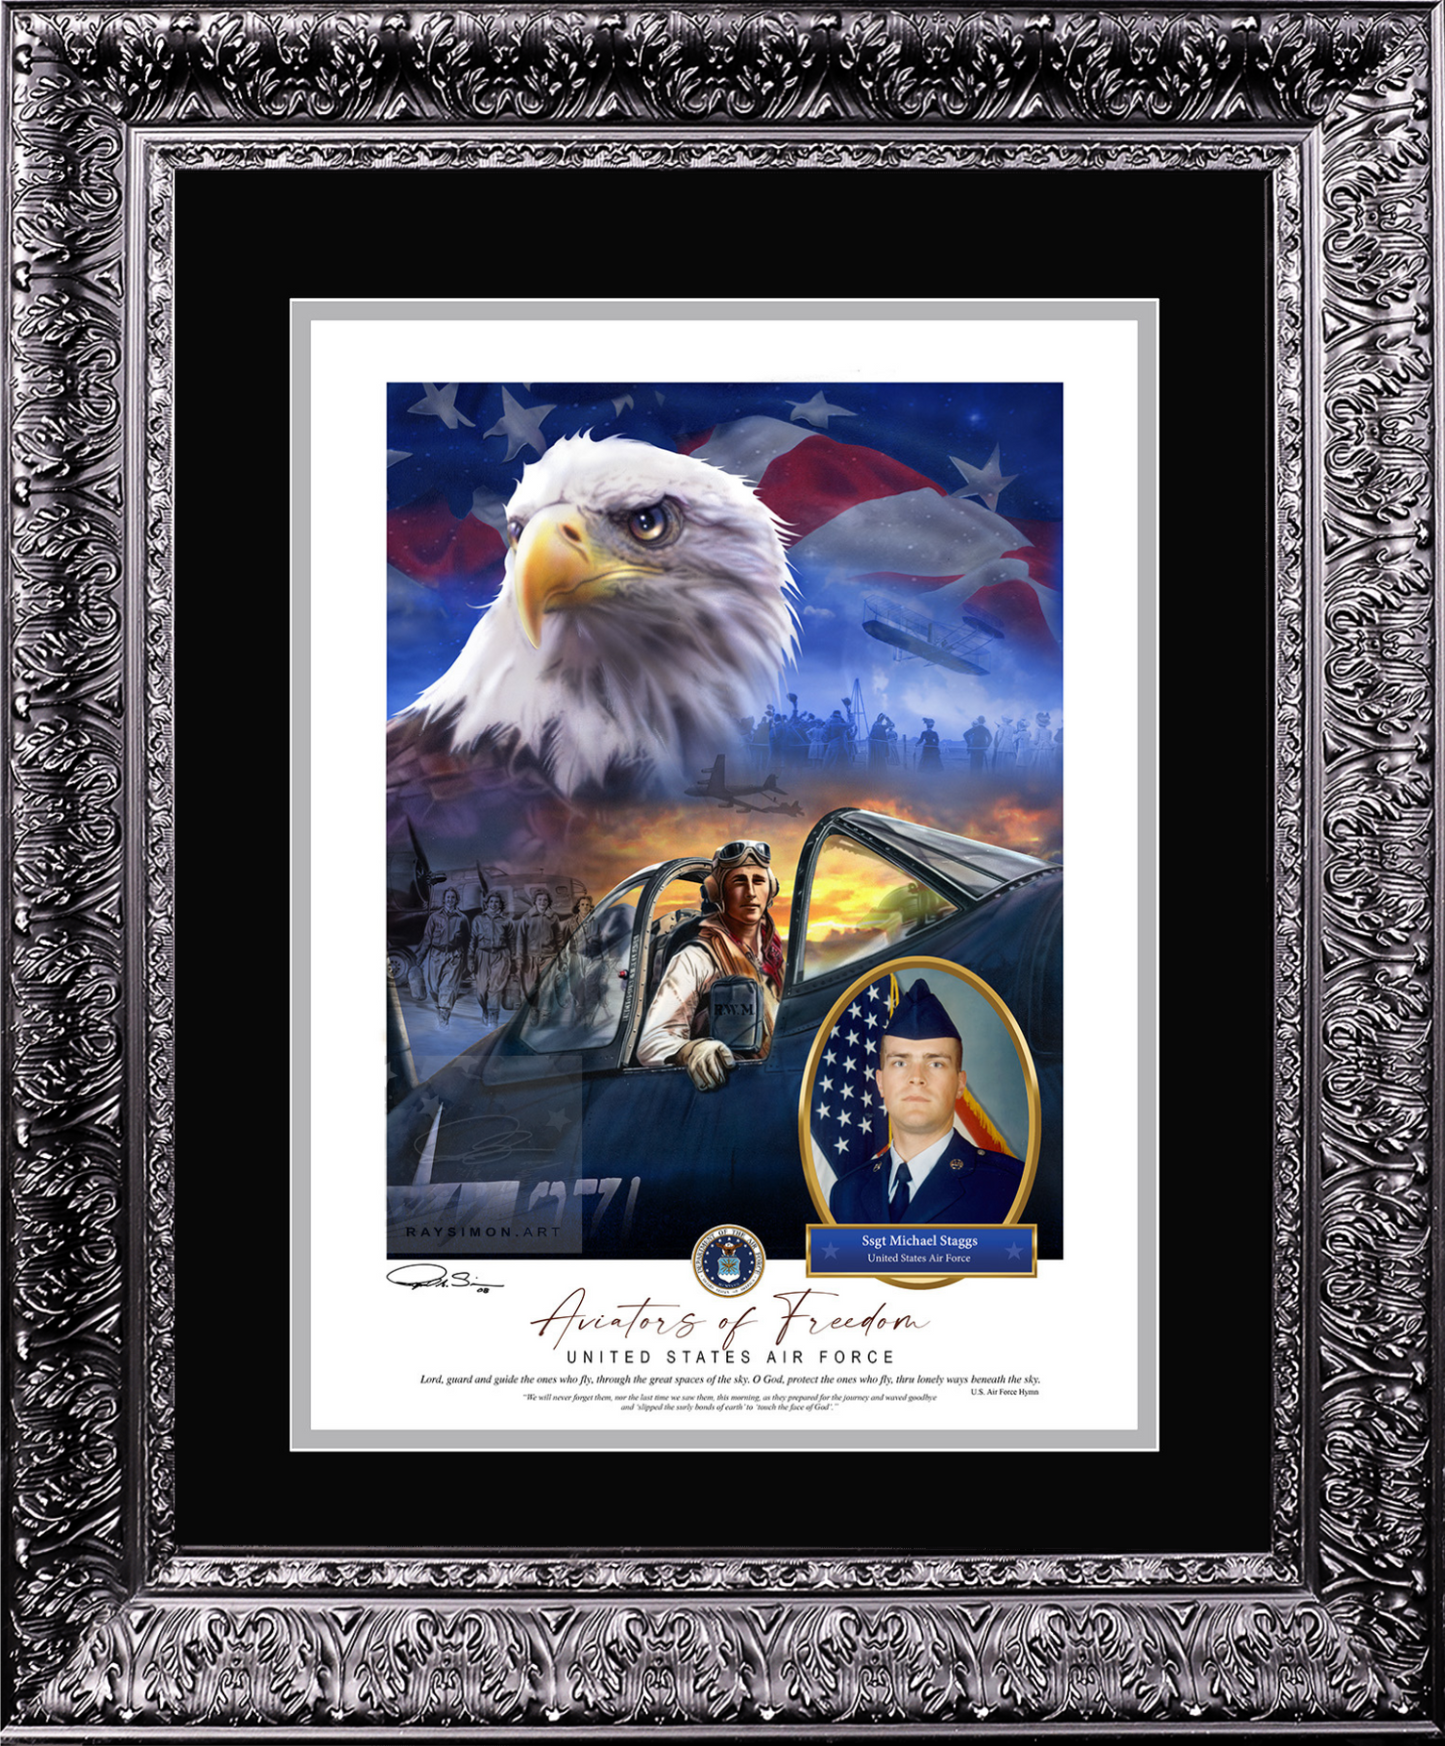 Air Force Painting - 'Aviators of Freedom'